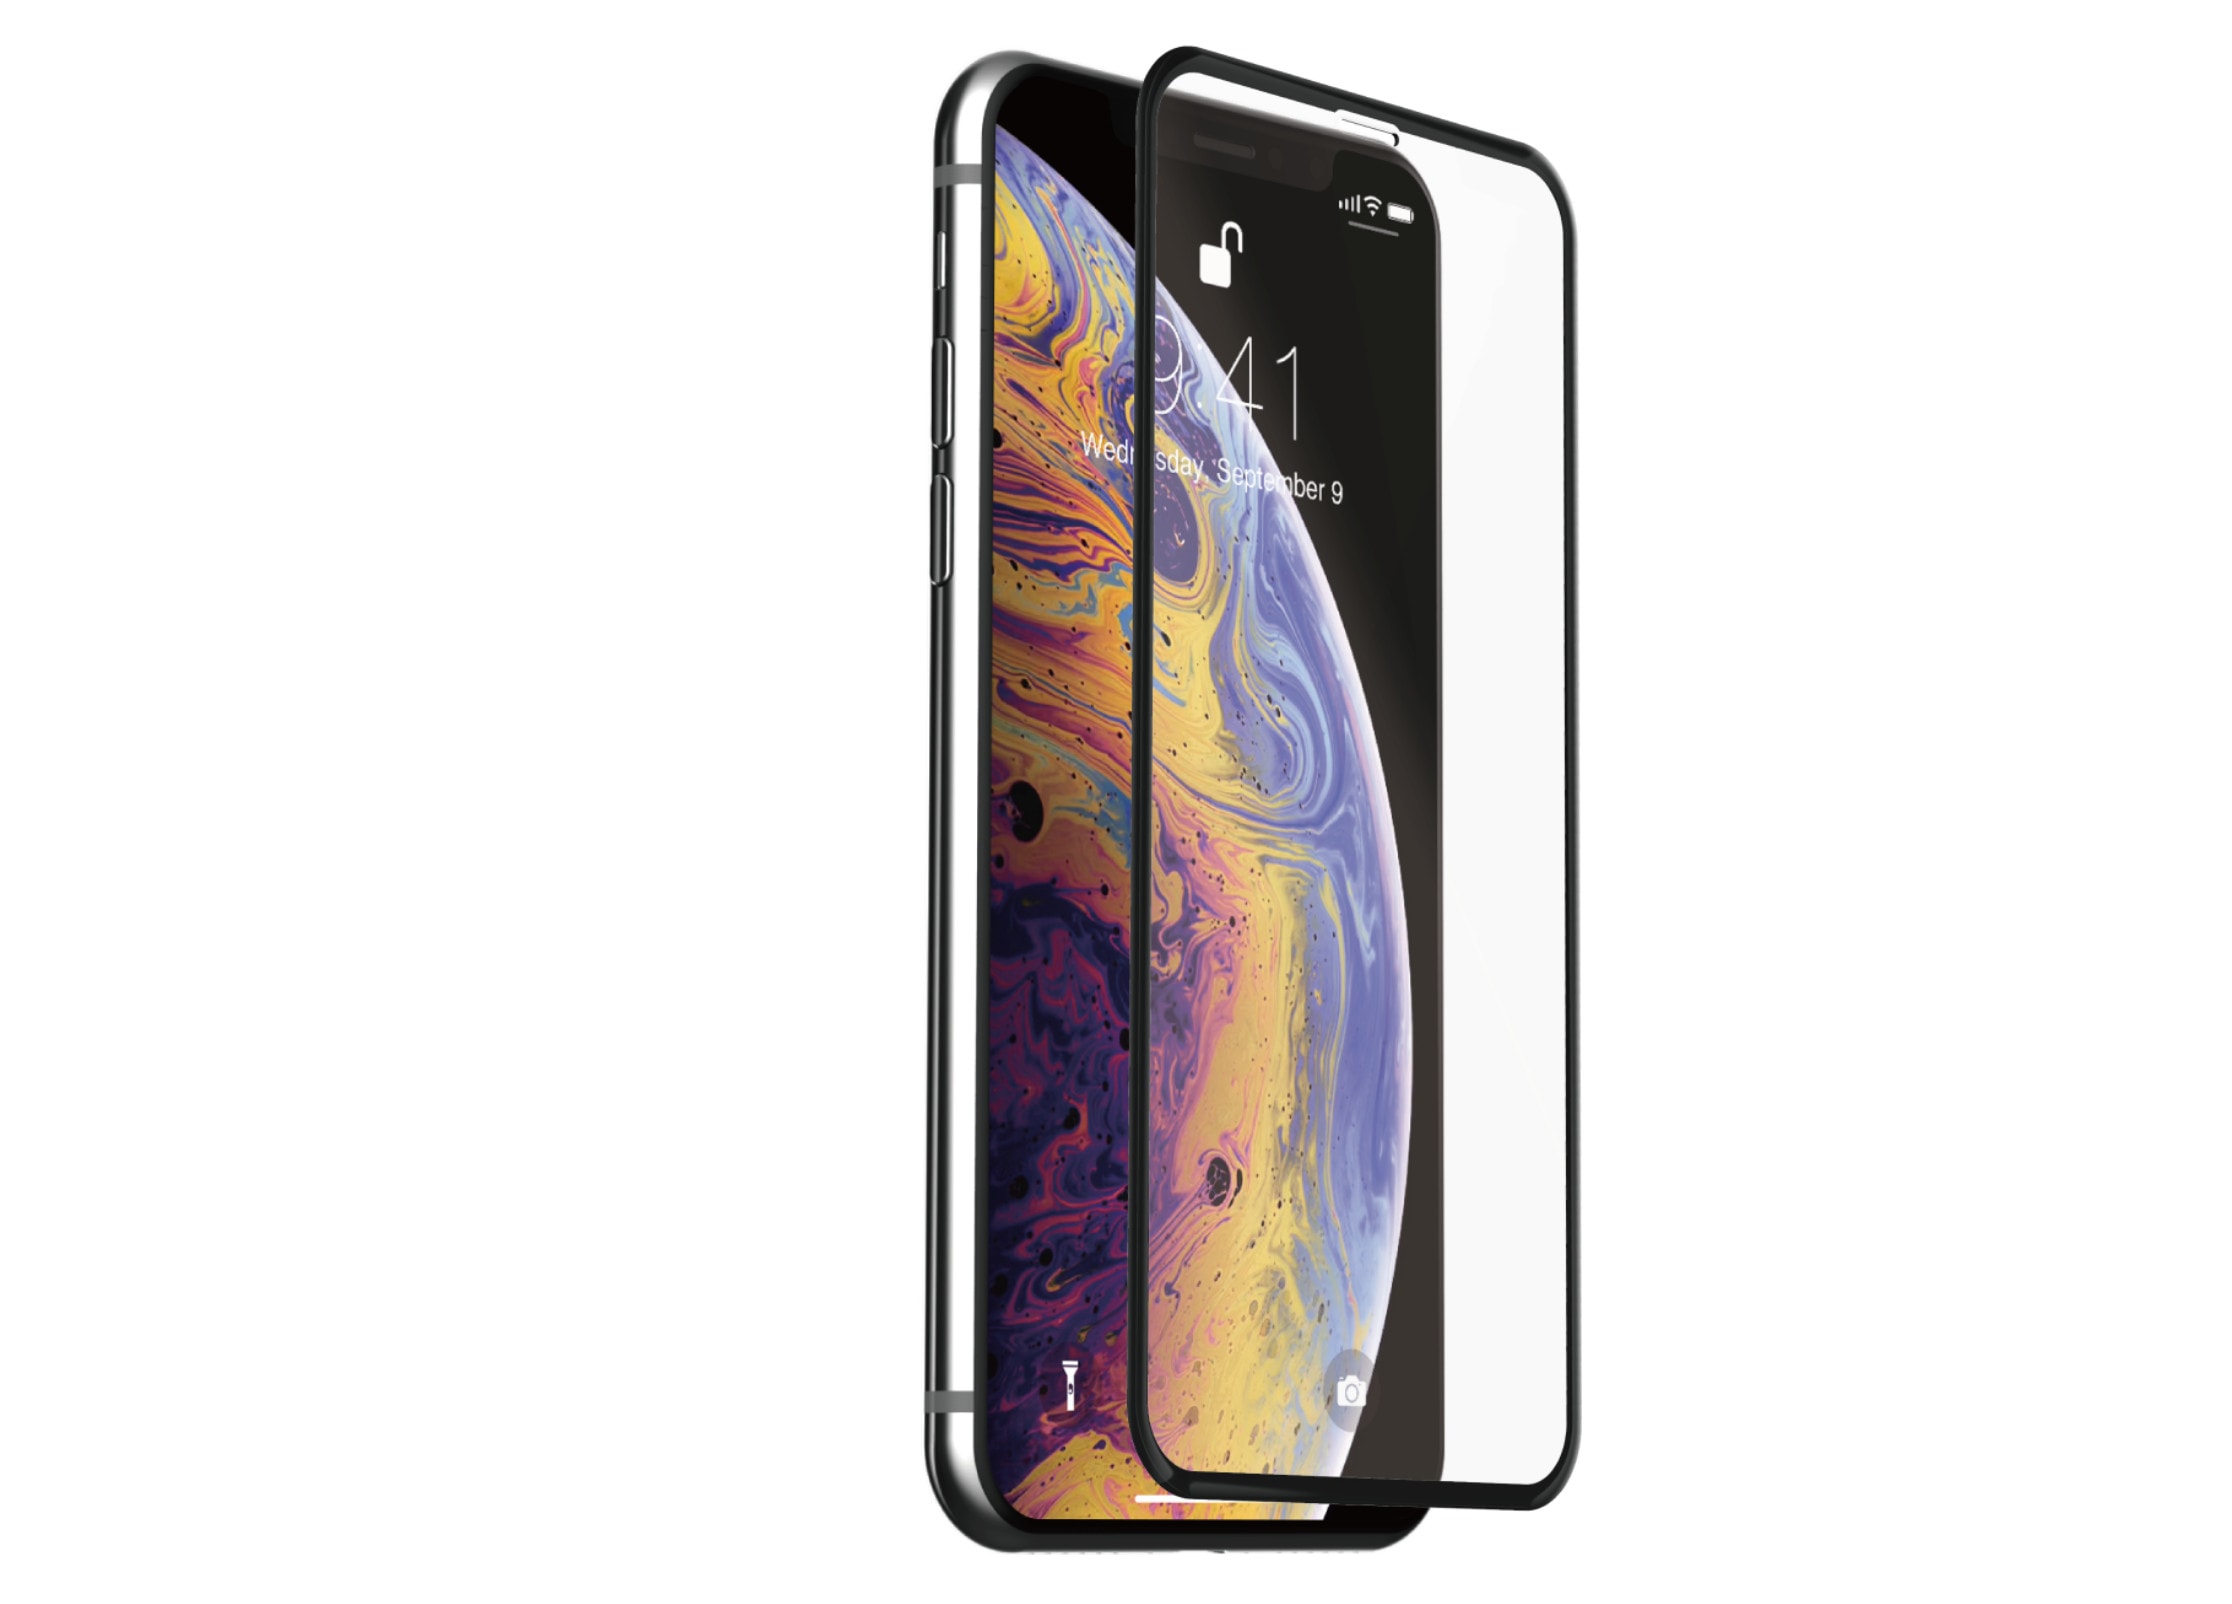 Xkin's glossy, black border that mimics and blends right into the iPhone X bezels.